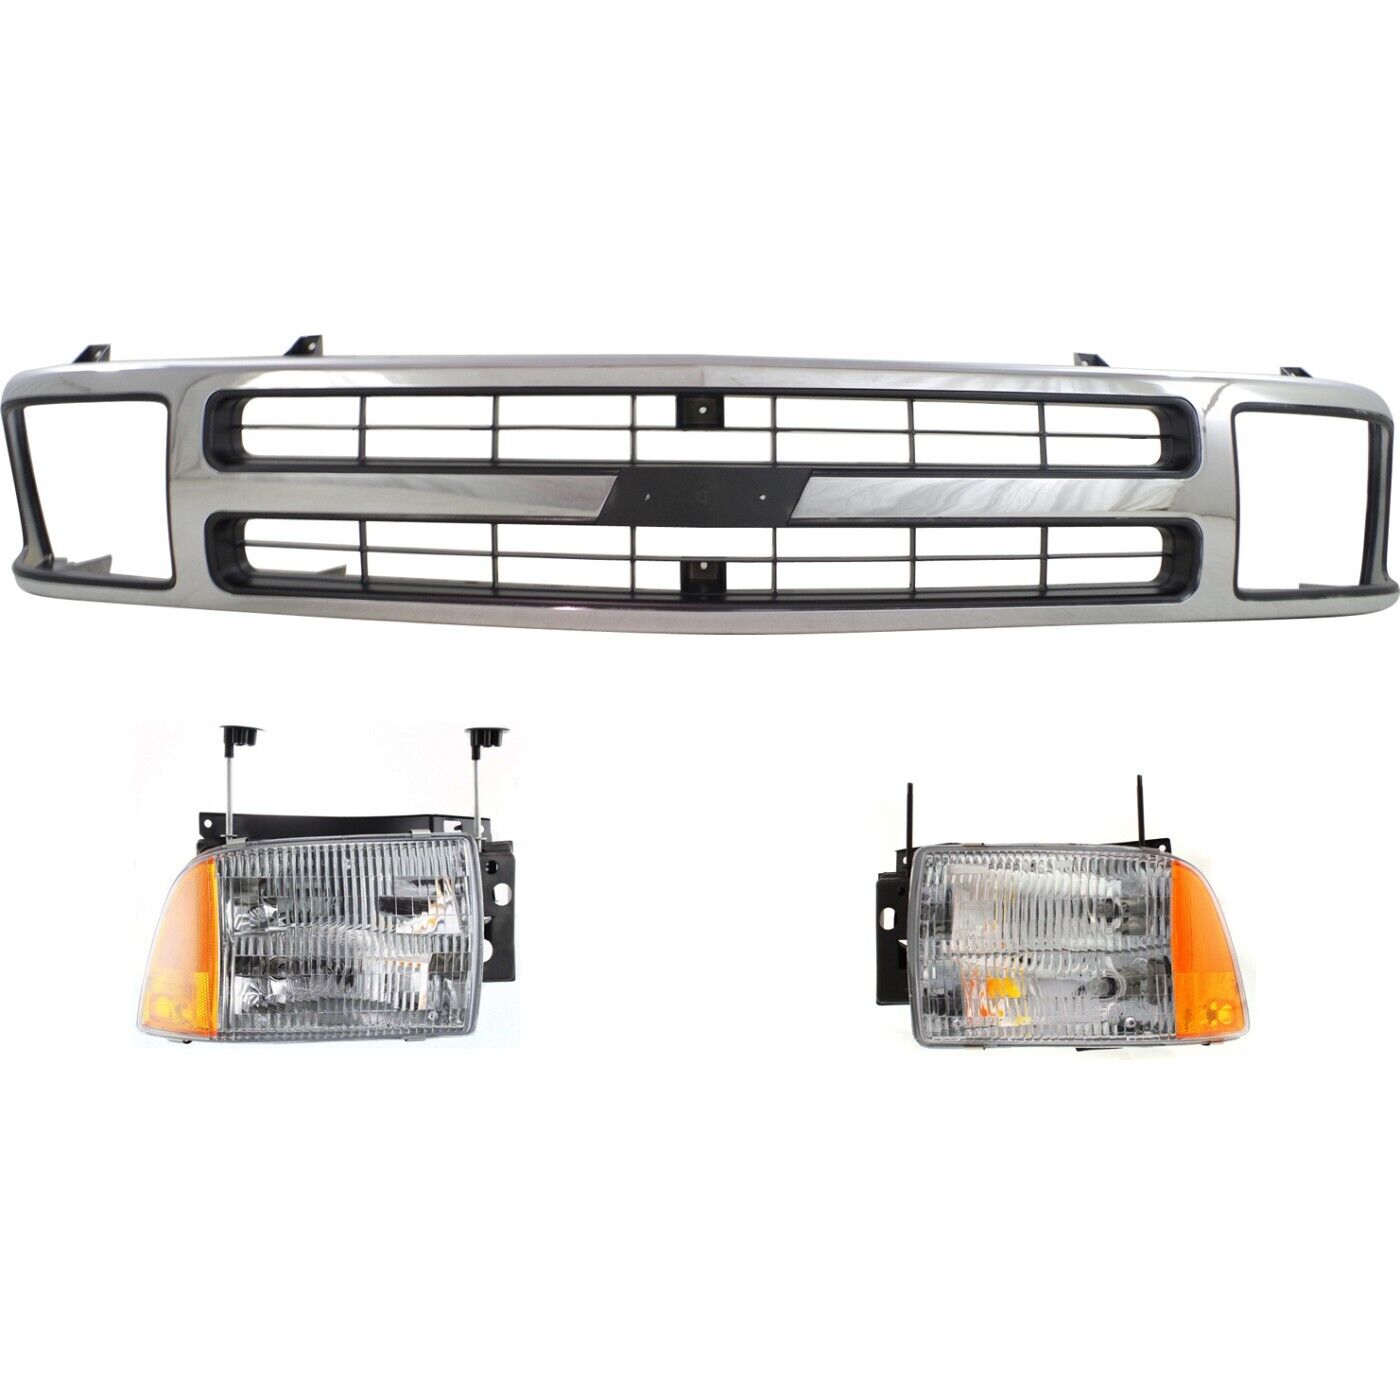 Grille Grill for Chevy Chevrolet Blazer 1995-1997